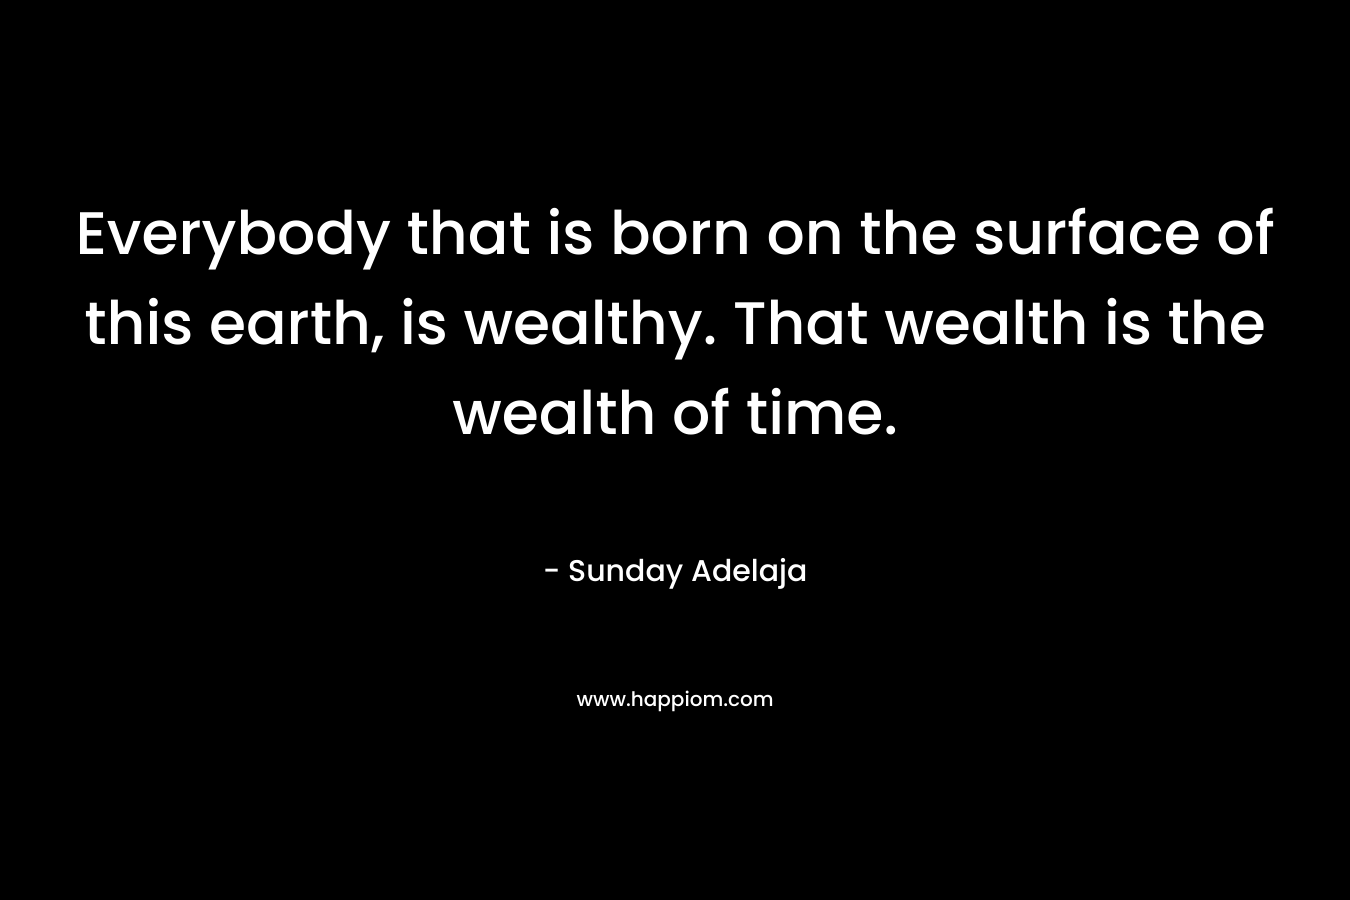 Everybody that is born on the surface of this earth, is wealthy. That wealth is the wealth of time.